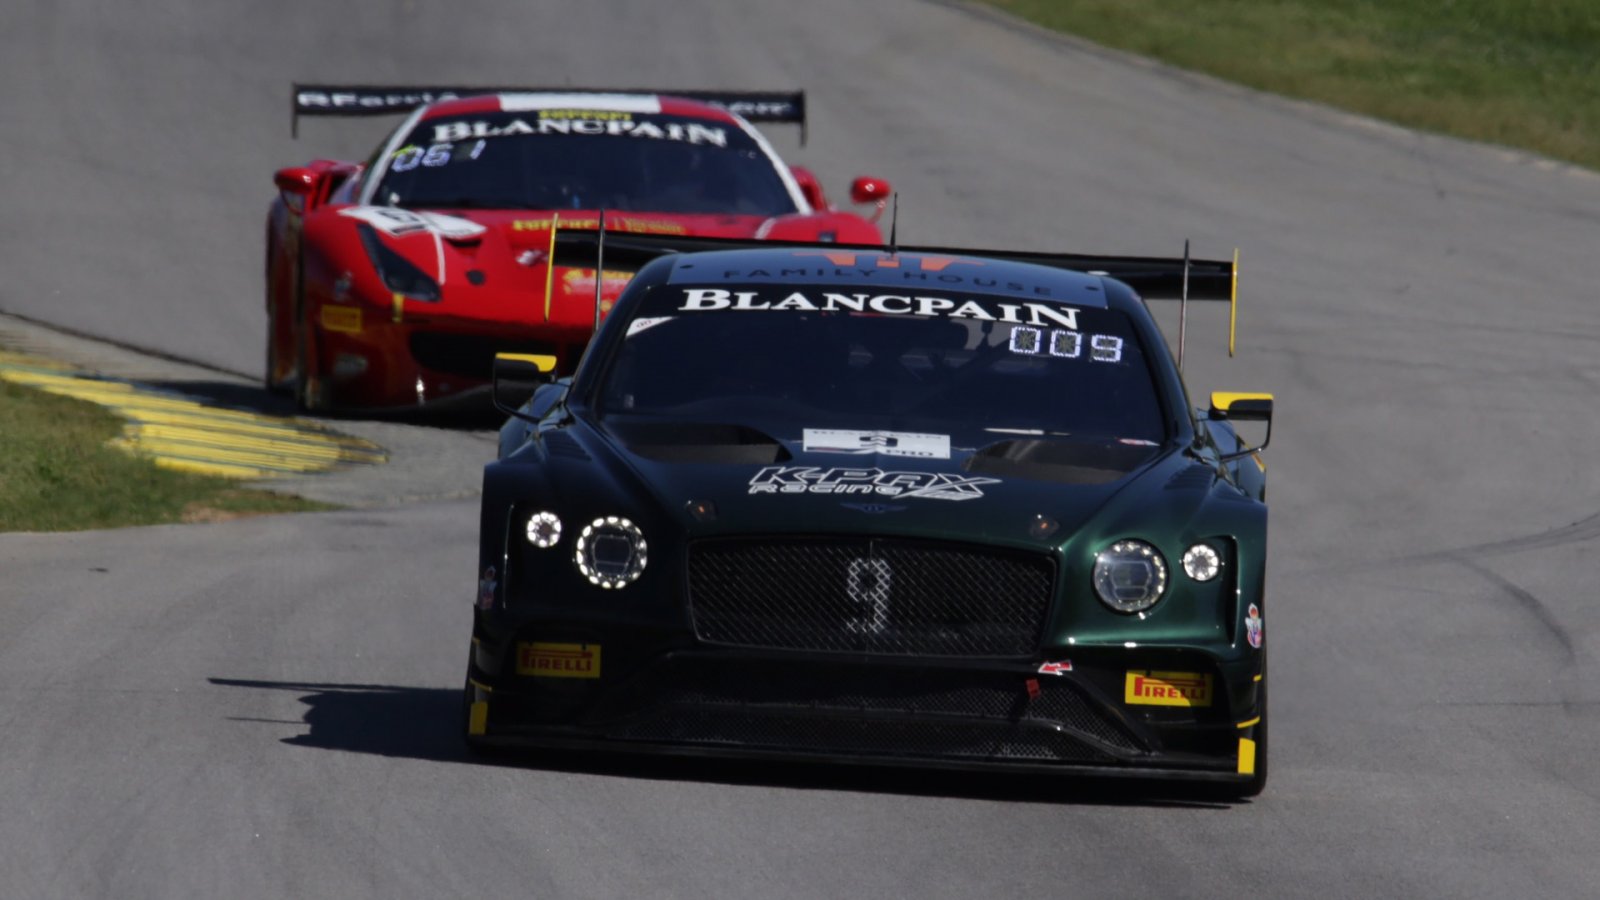 K-PAX Bentley Scores Double VIR Pole in Two Tight Qualifying Sessions